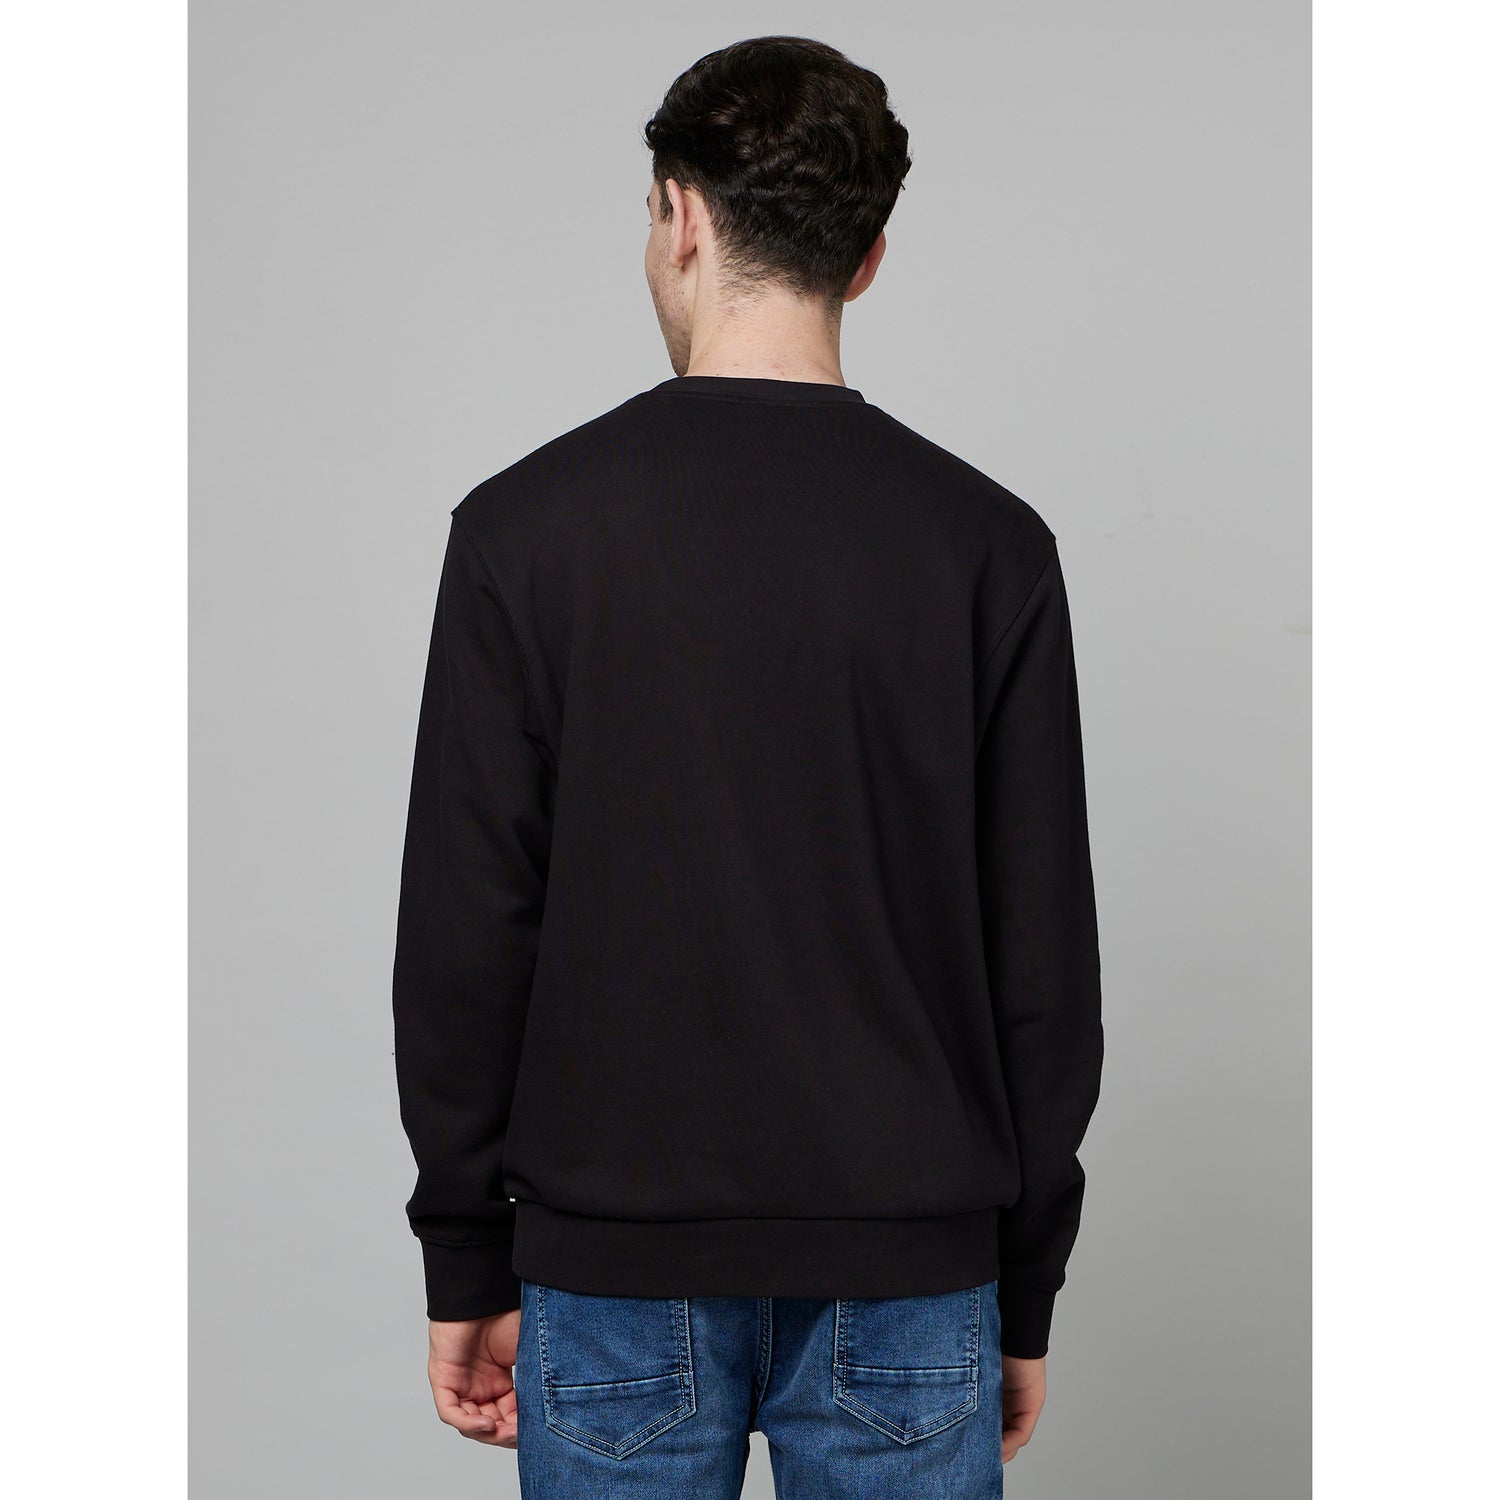 Black Long Sleeves Cotton Pullover Sweater (FESEVEN)